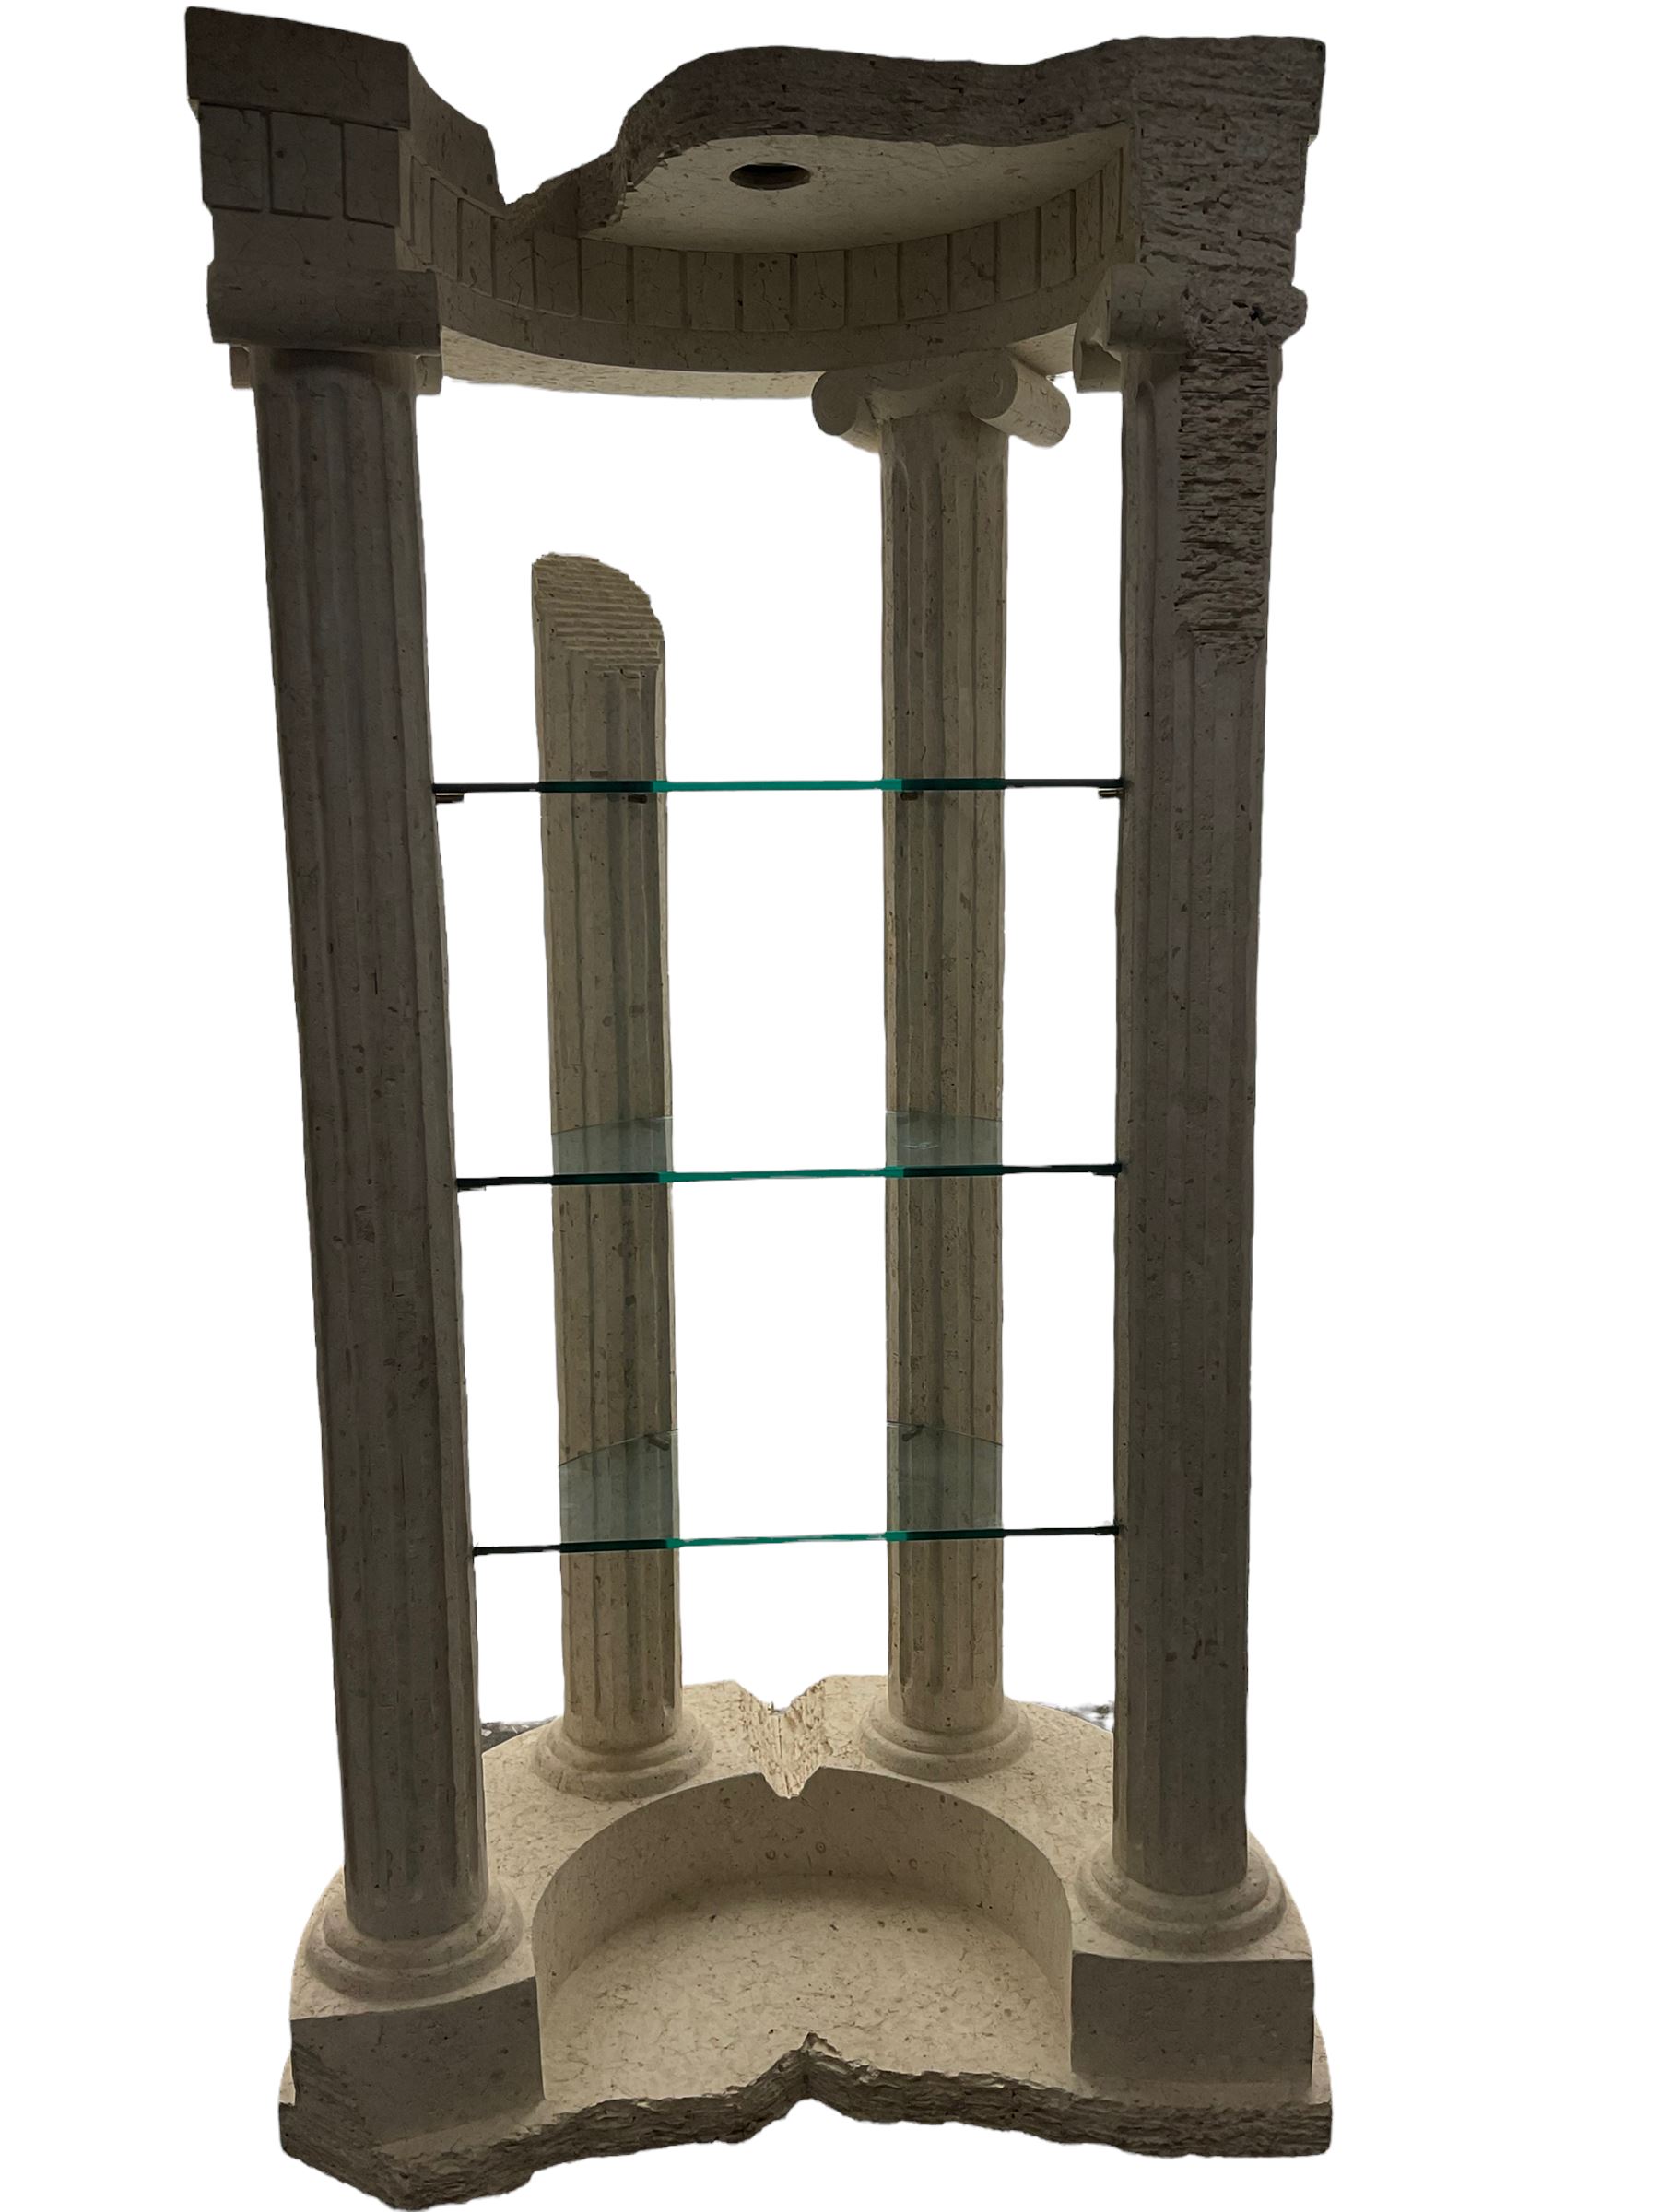 Cast architectural stone effect column display stand - Image 4 of 6